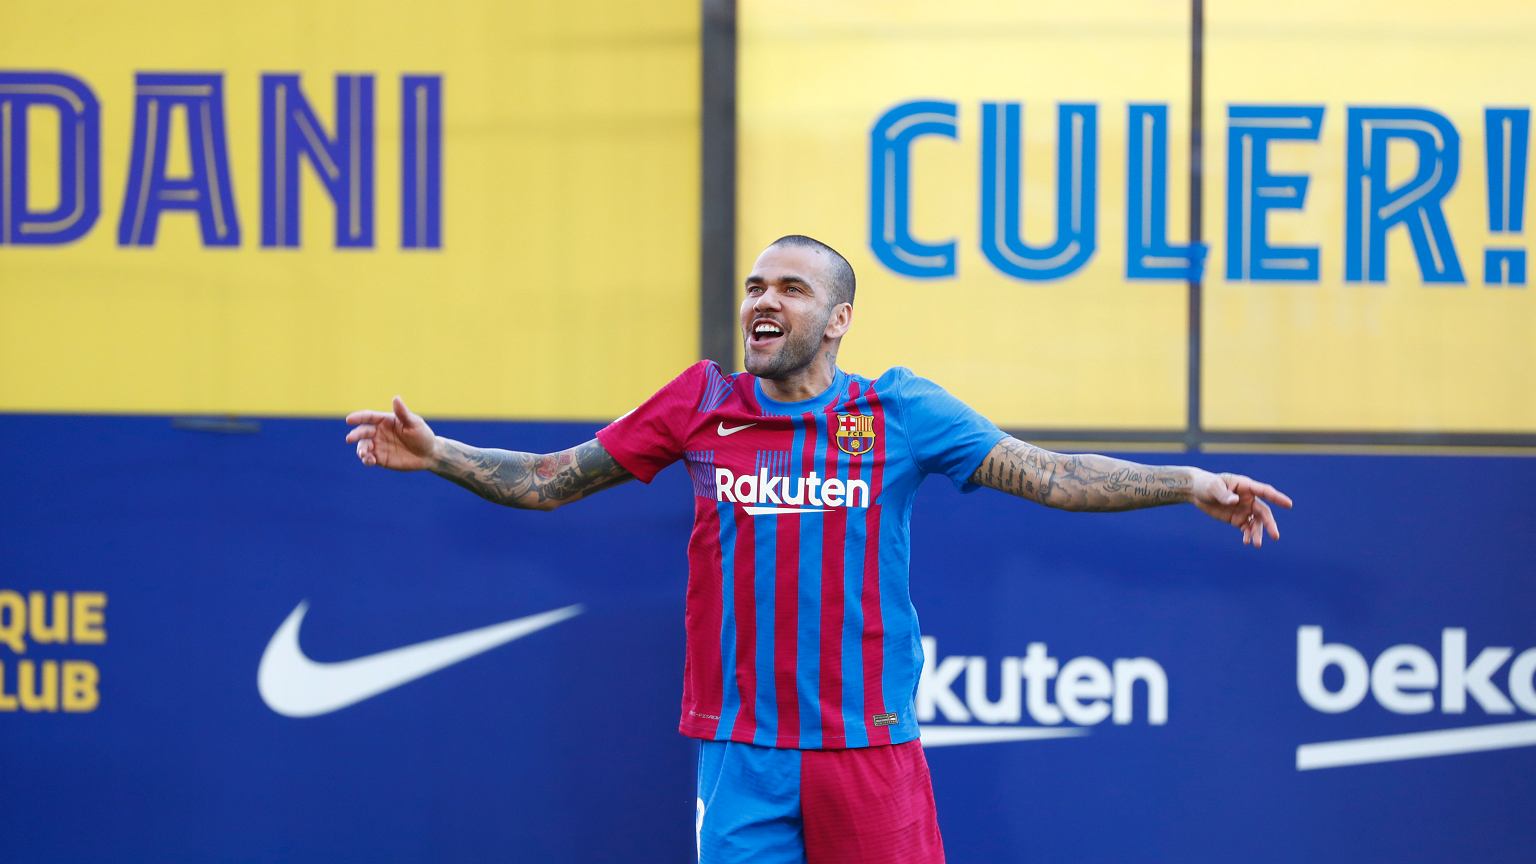 Dani Alves with a gold medal in the men's soccer championship